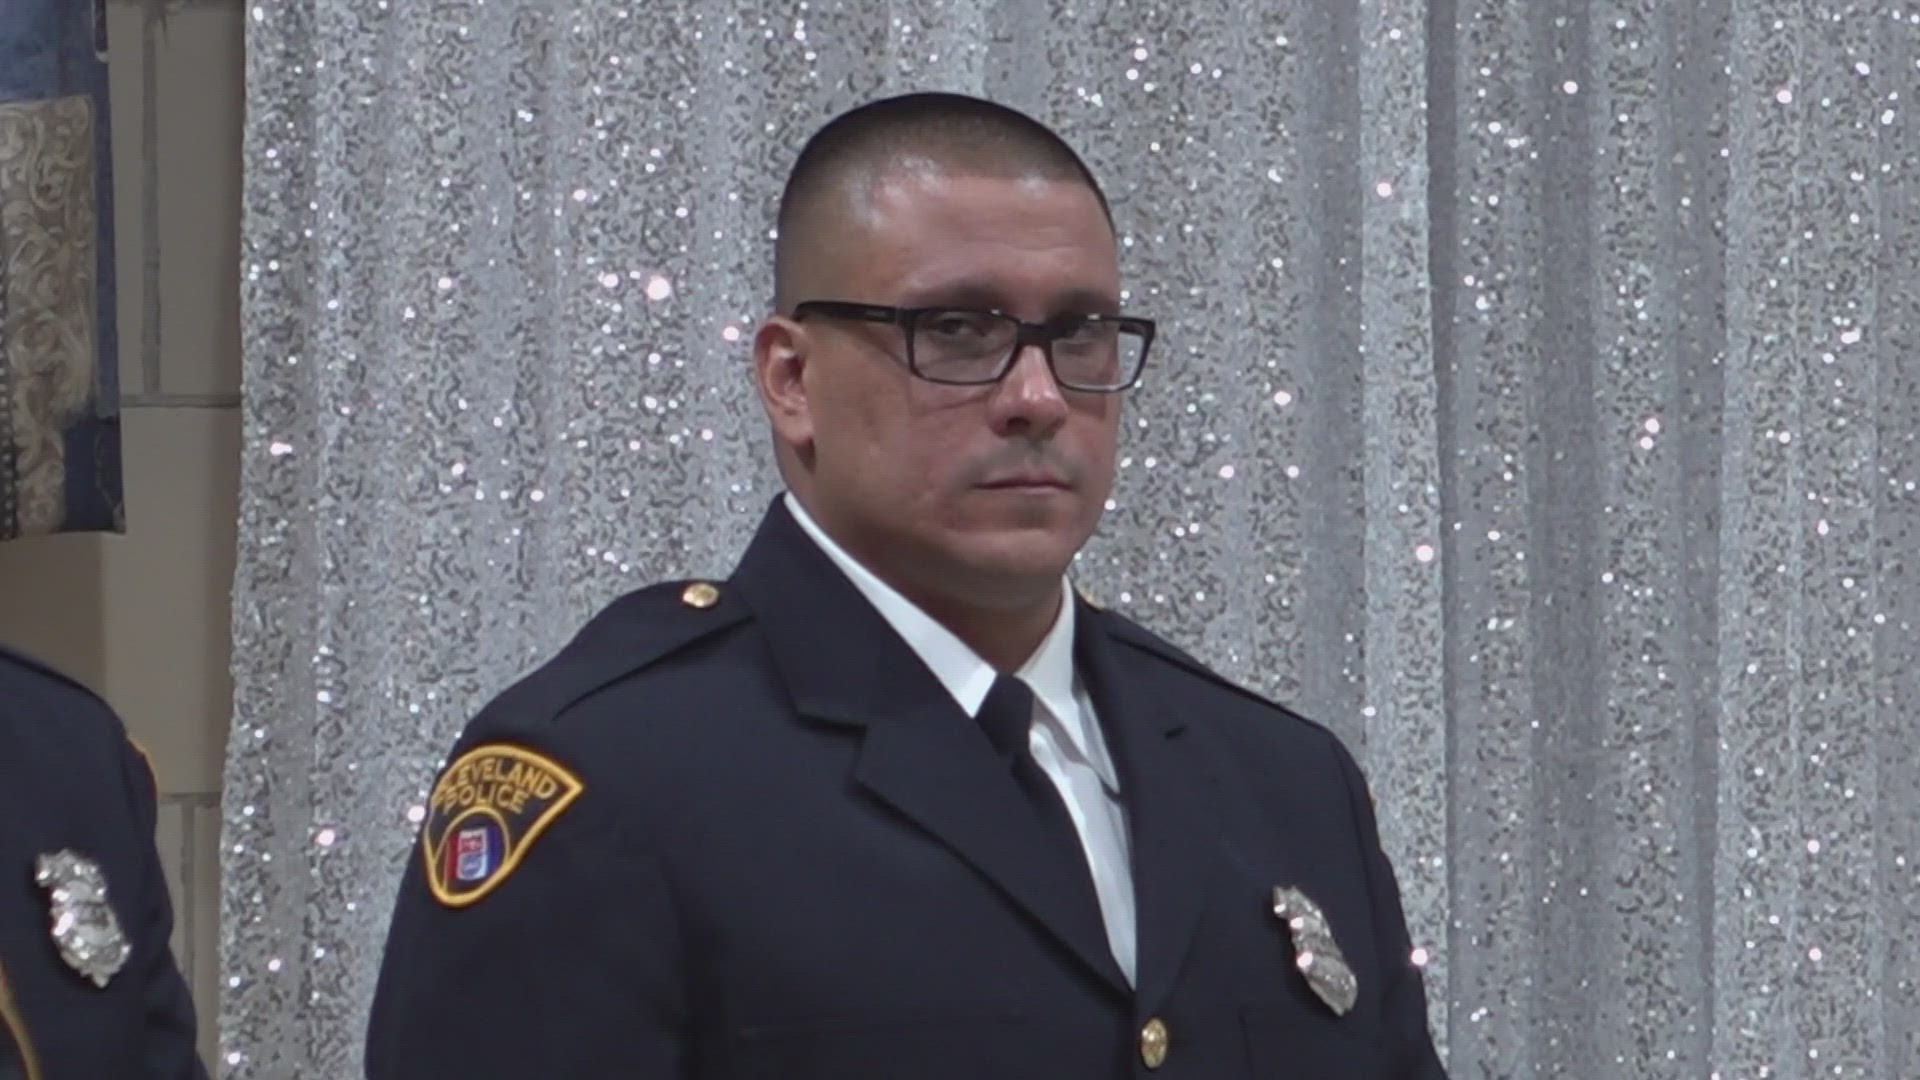 Officer Riccardo Holt-Santiago was recognized Thursday night at an awards ceremony for the second district.